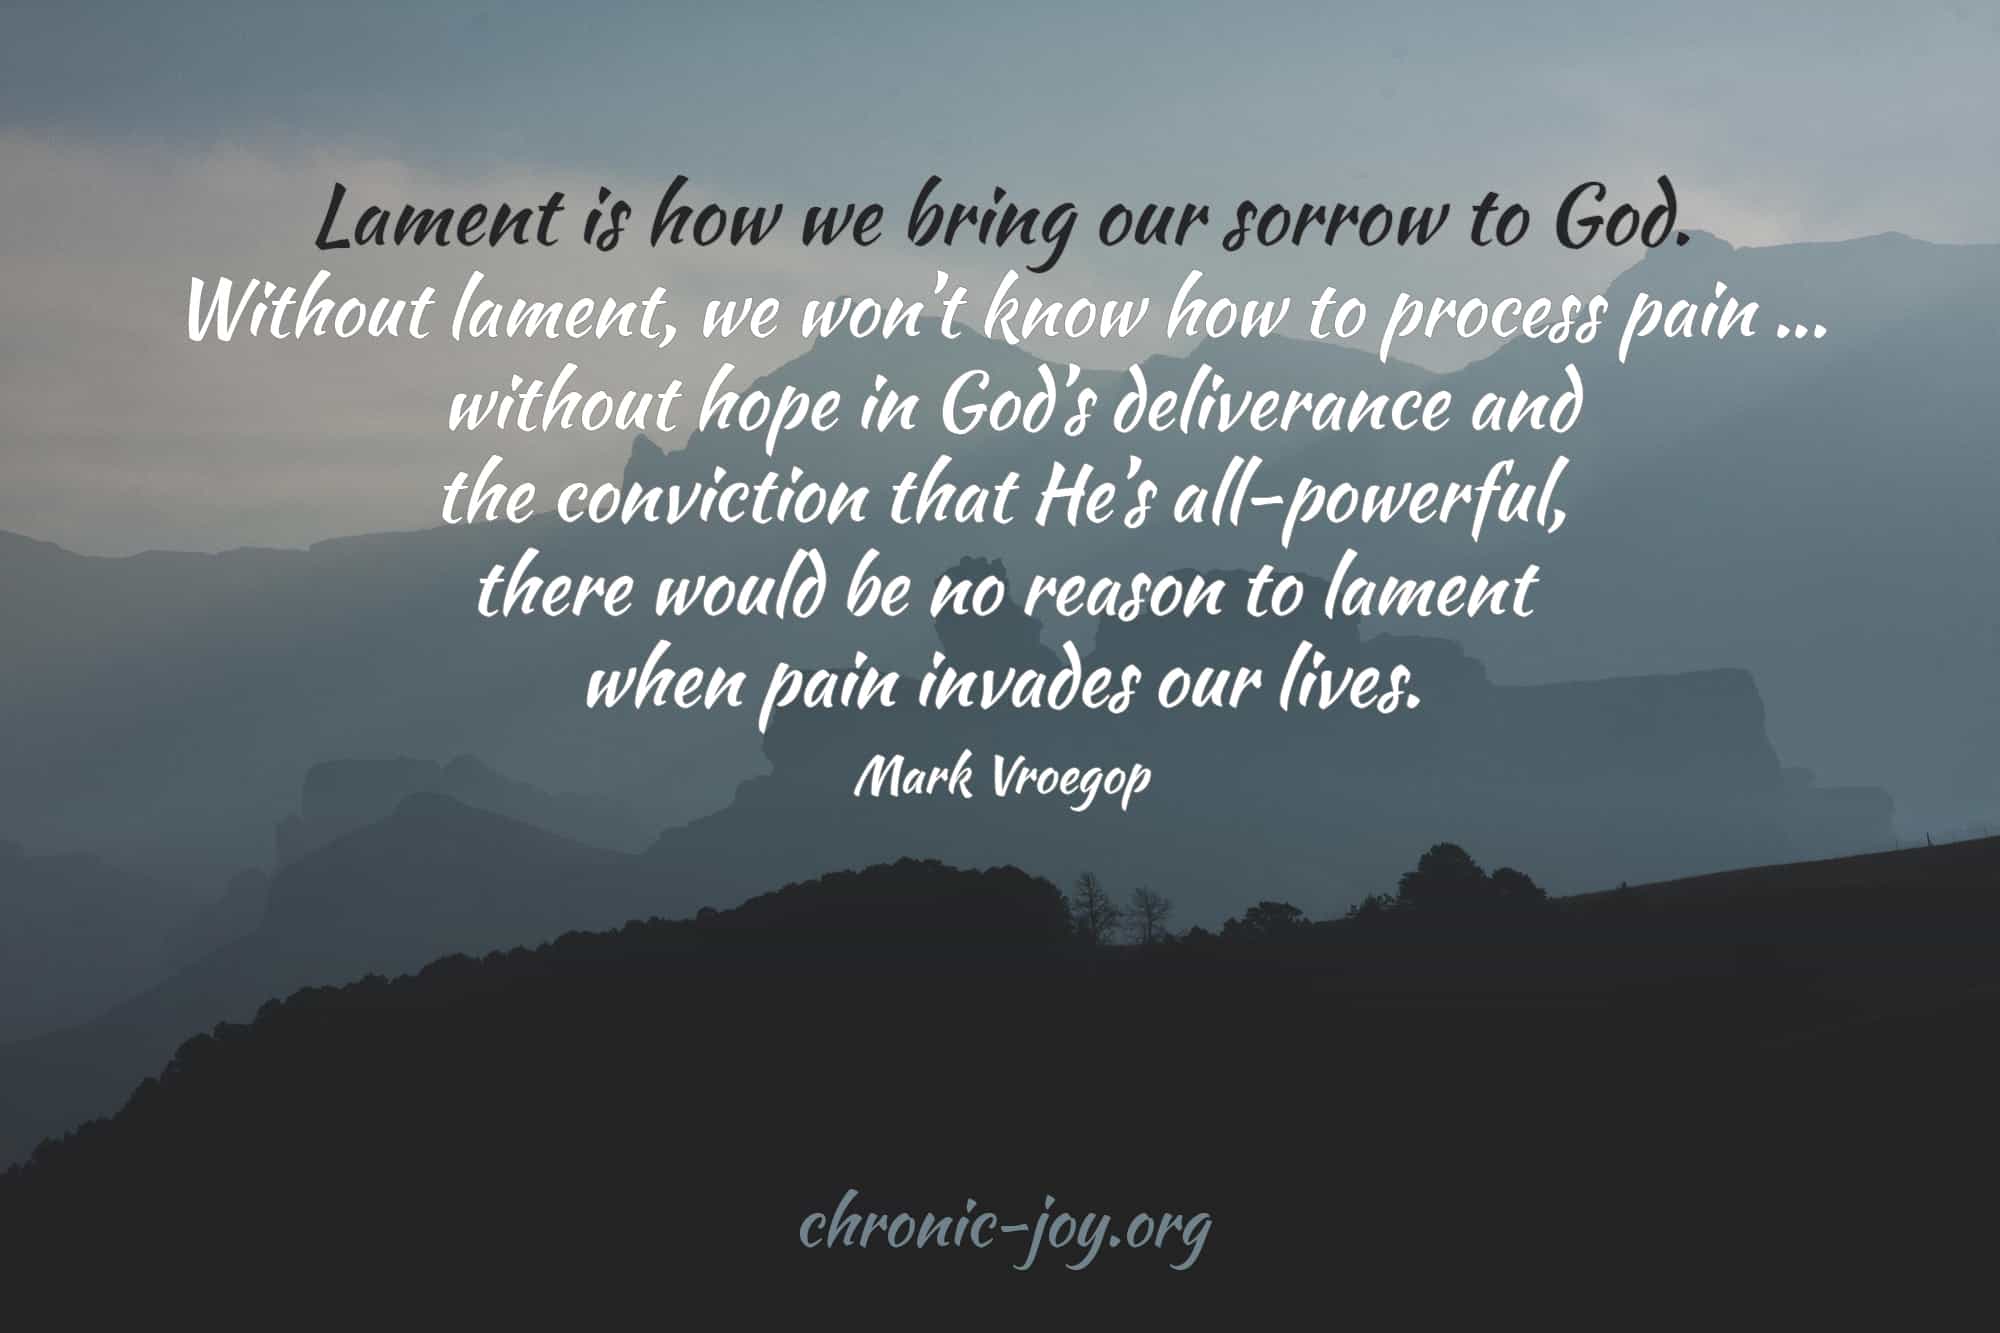 Coping with Depression Through God’s Sustaining Grace